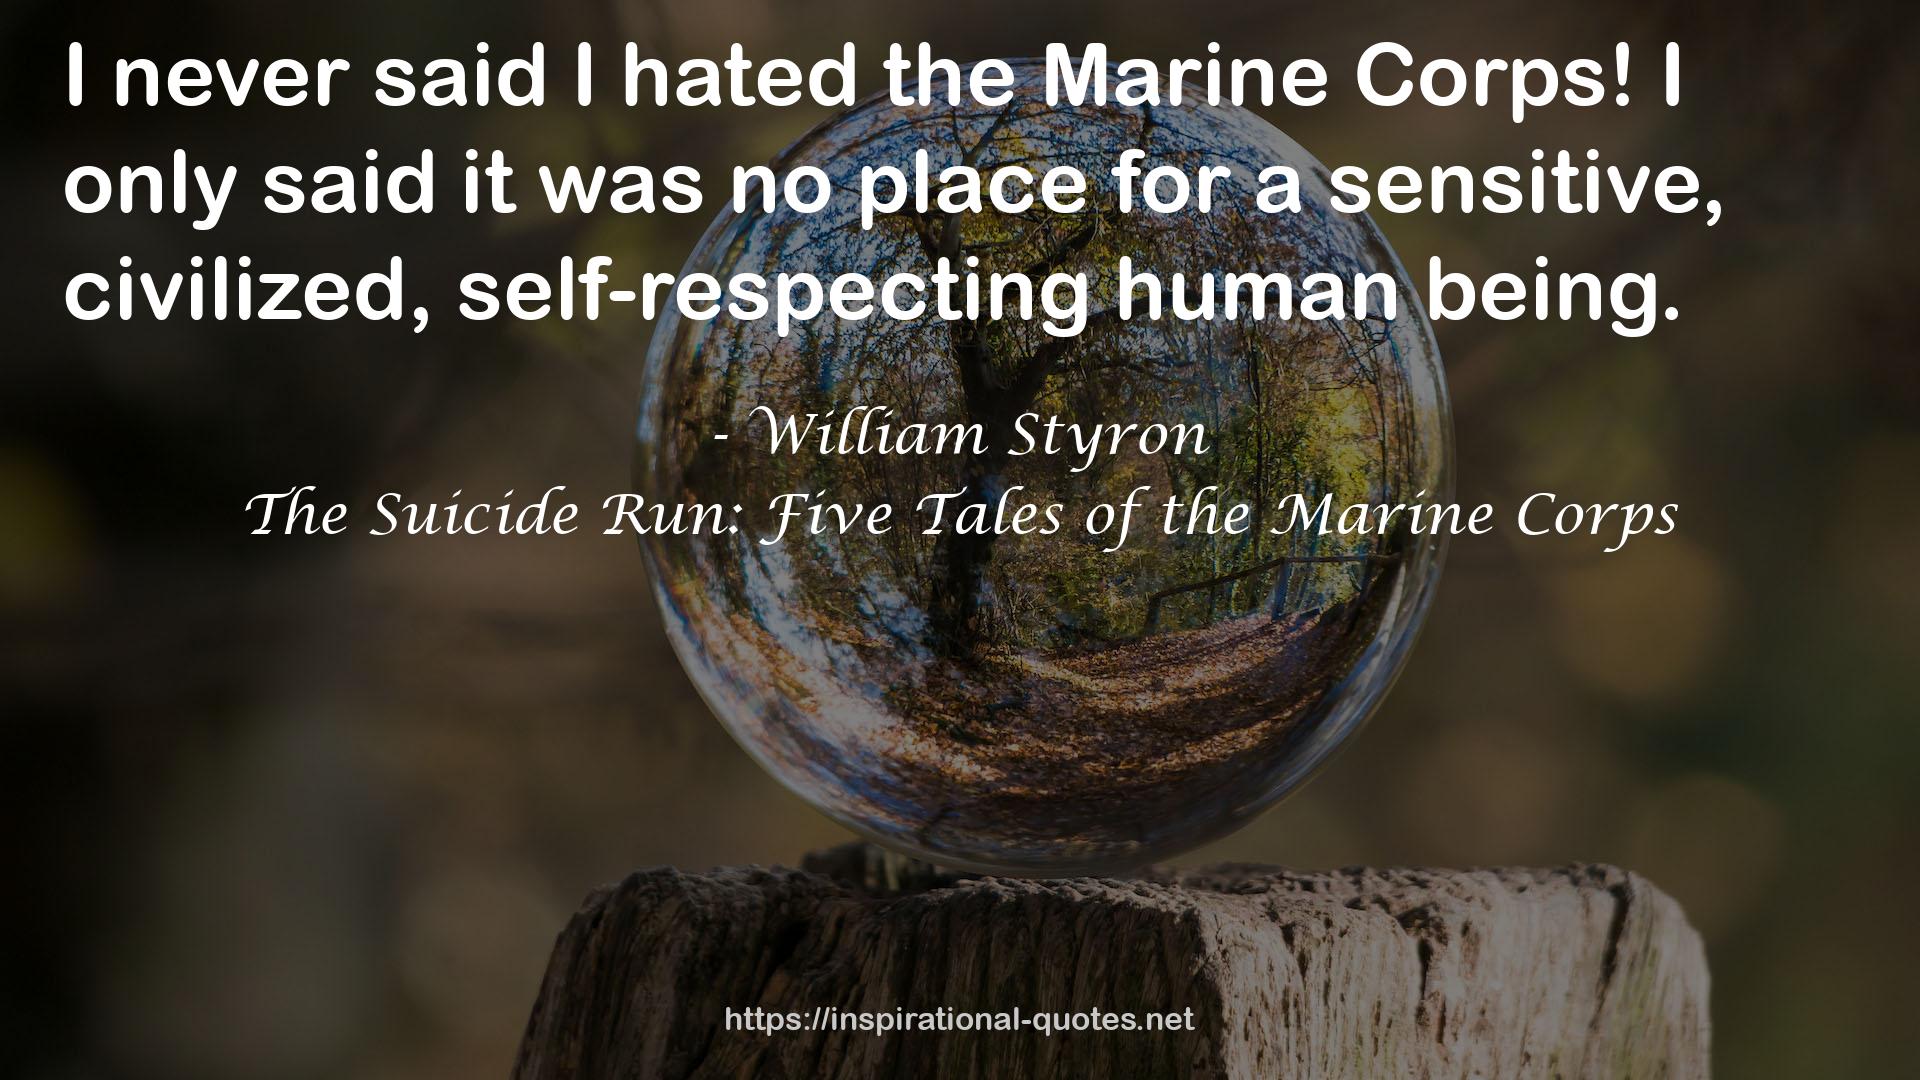 The Suicide Run: Five Tales of the Marine Corps QUOTES